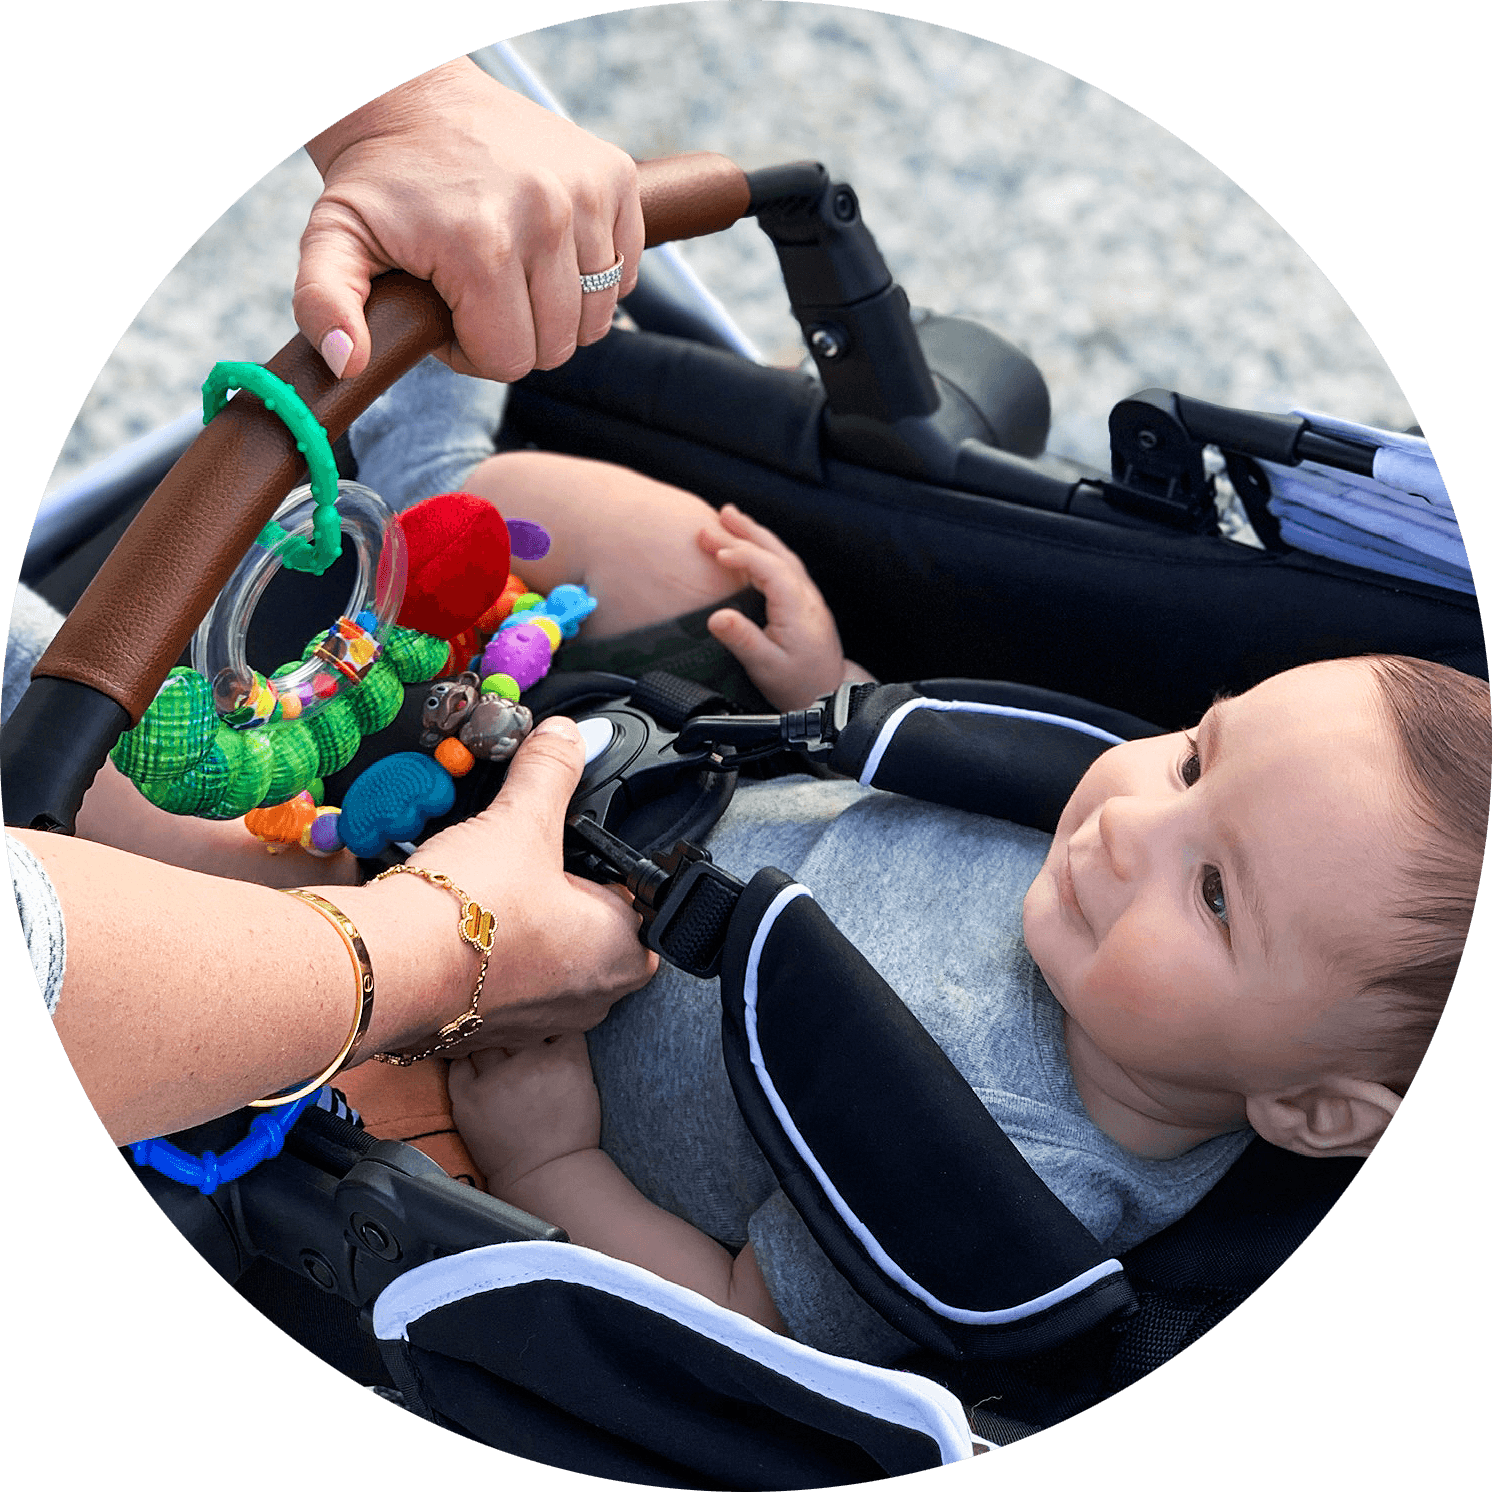 A baby in a stroller looks at a colorful toy held by an adult's hand, focusing on baby's curious expression.